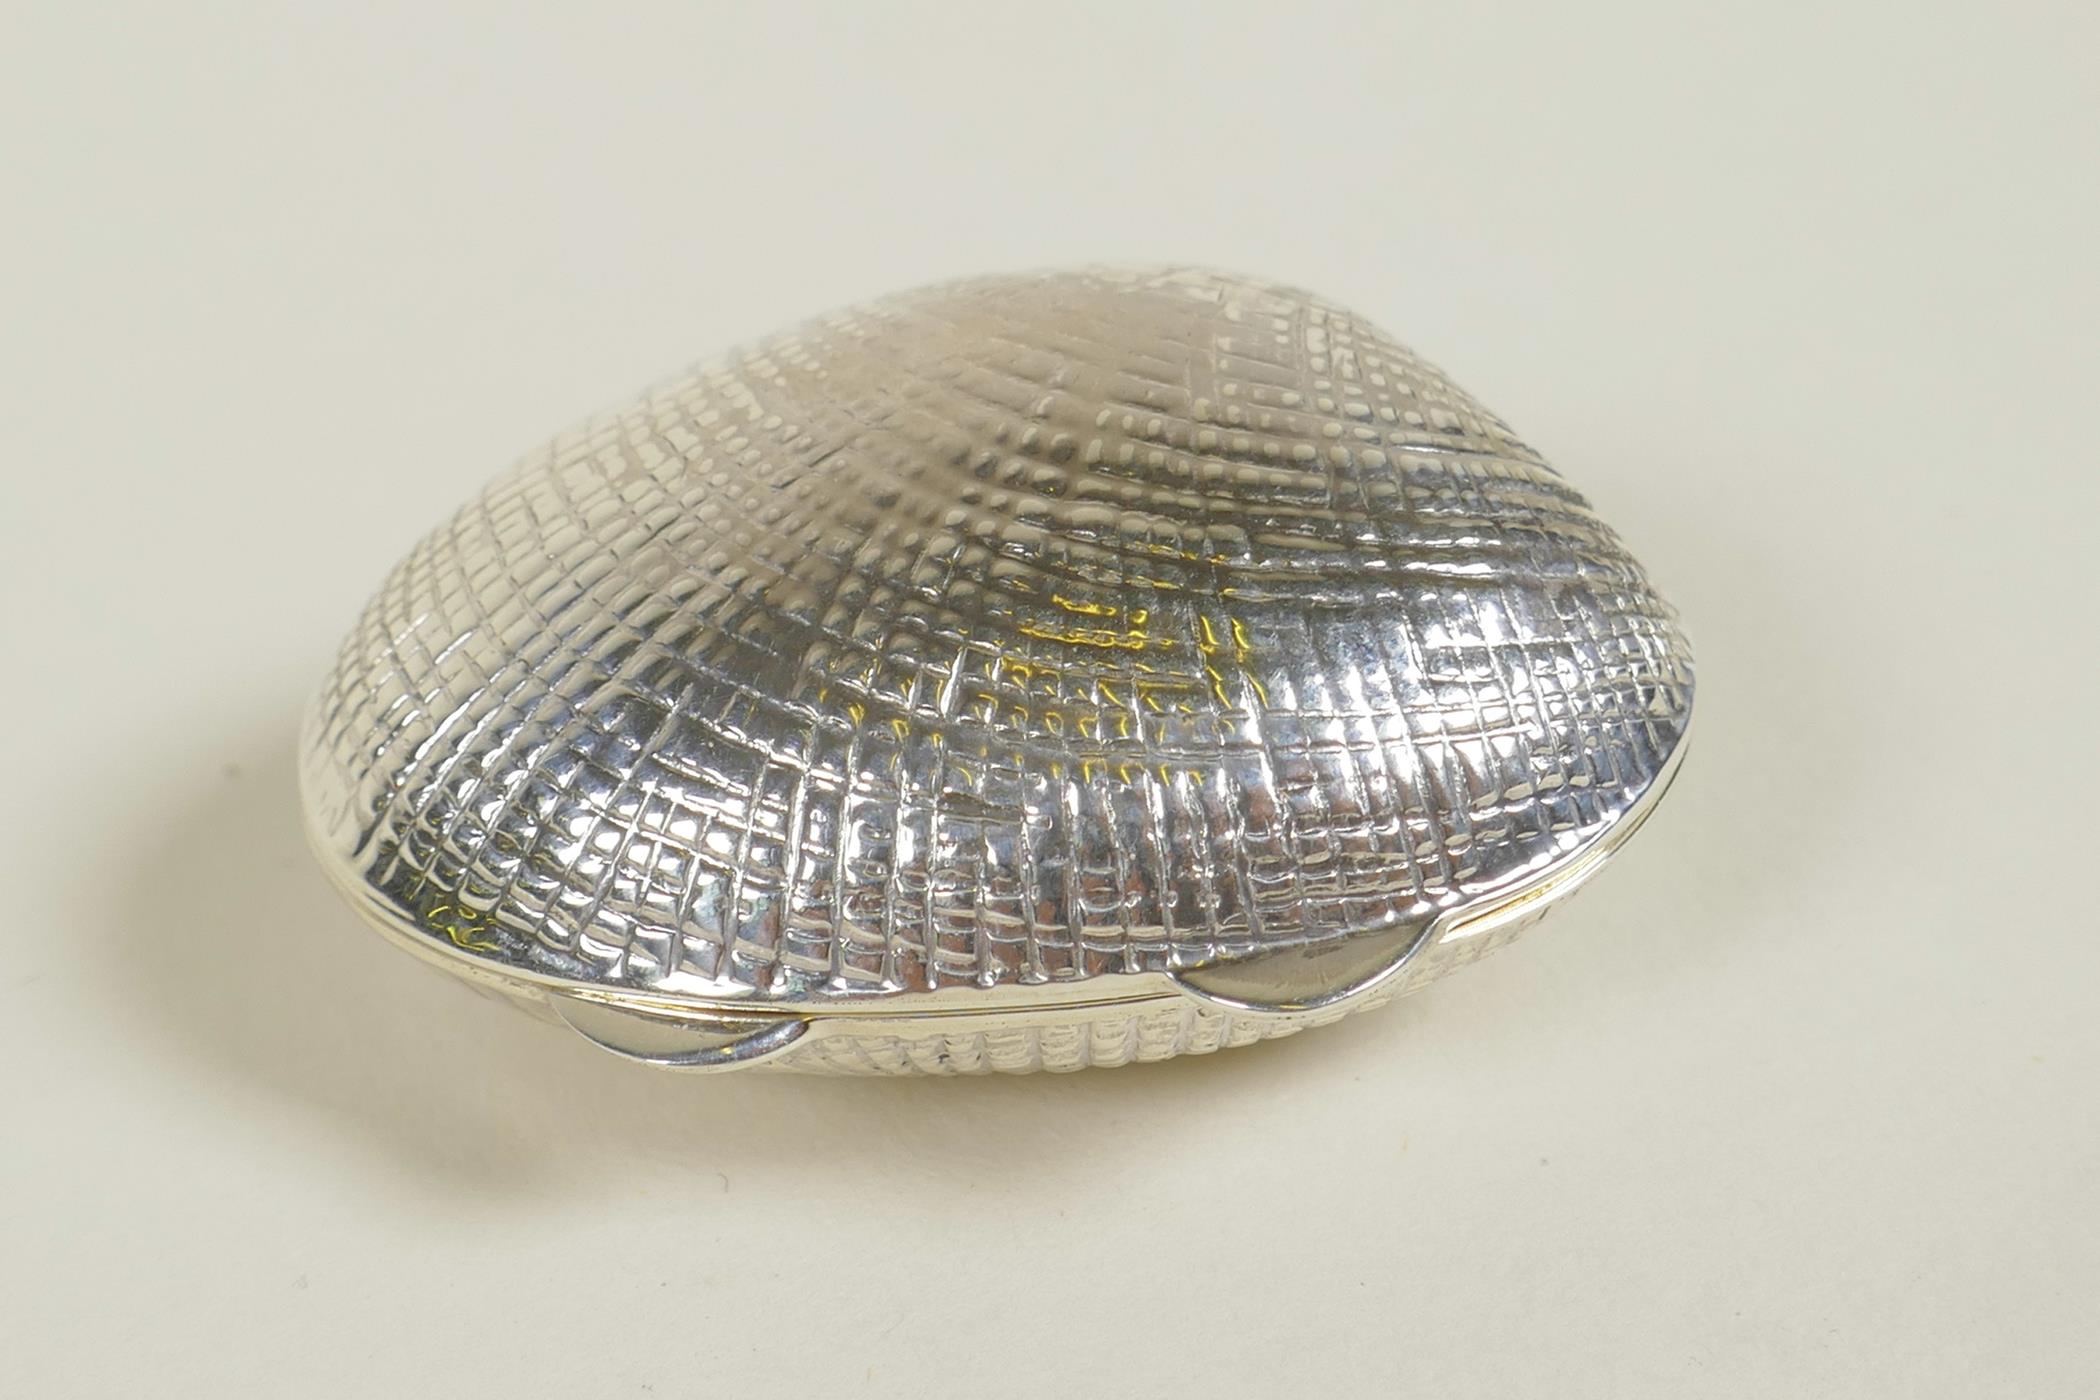 A 925 silver pill box in the form of a clam shell, 1½"